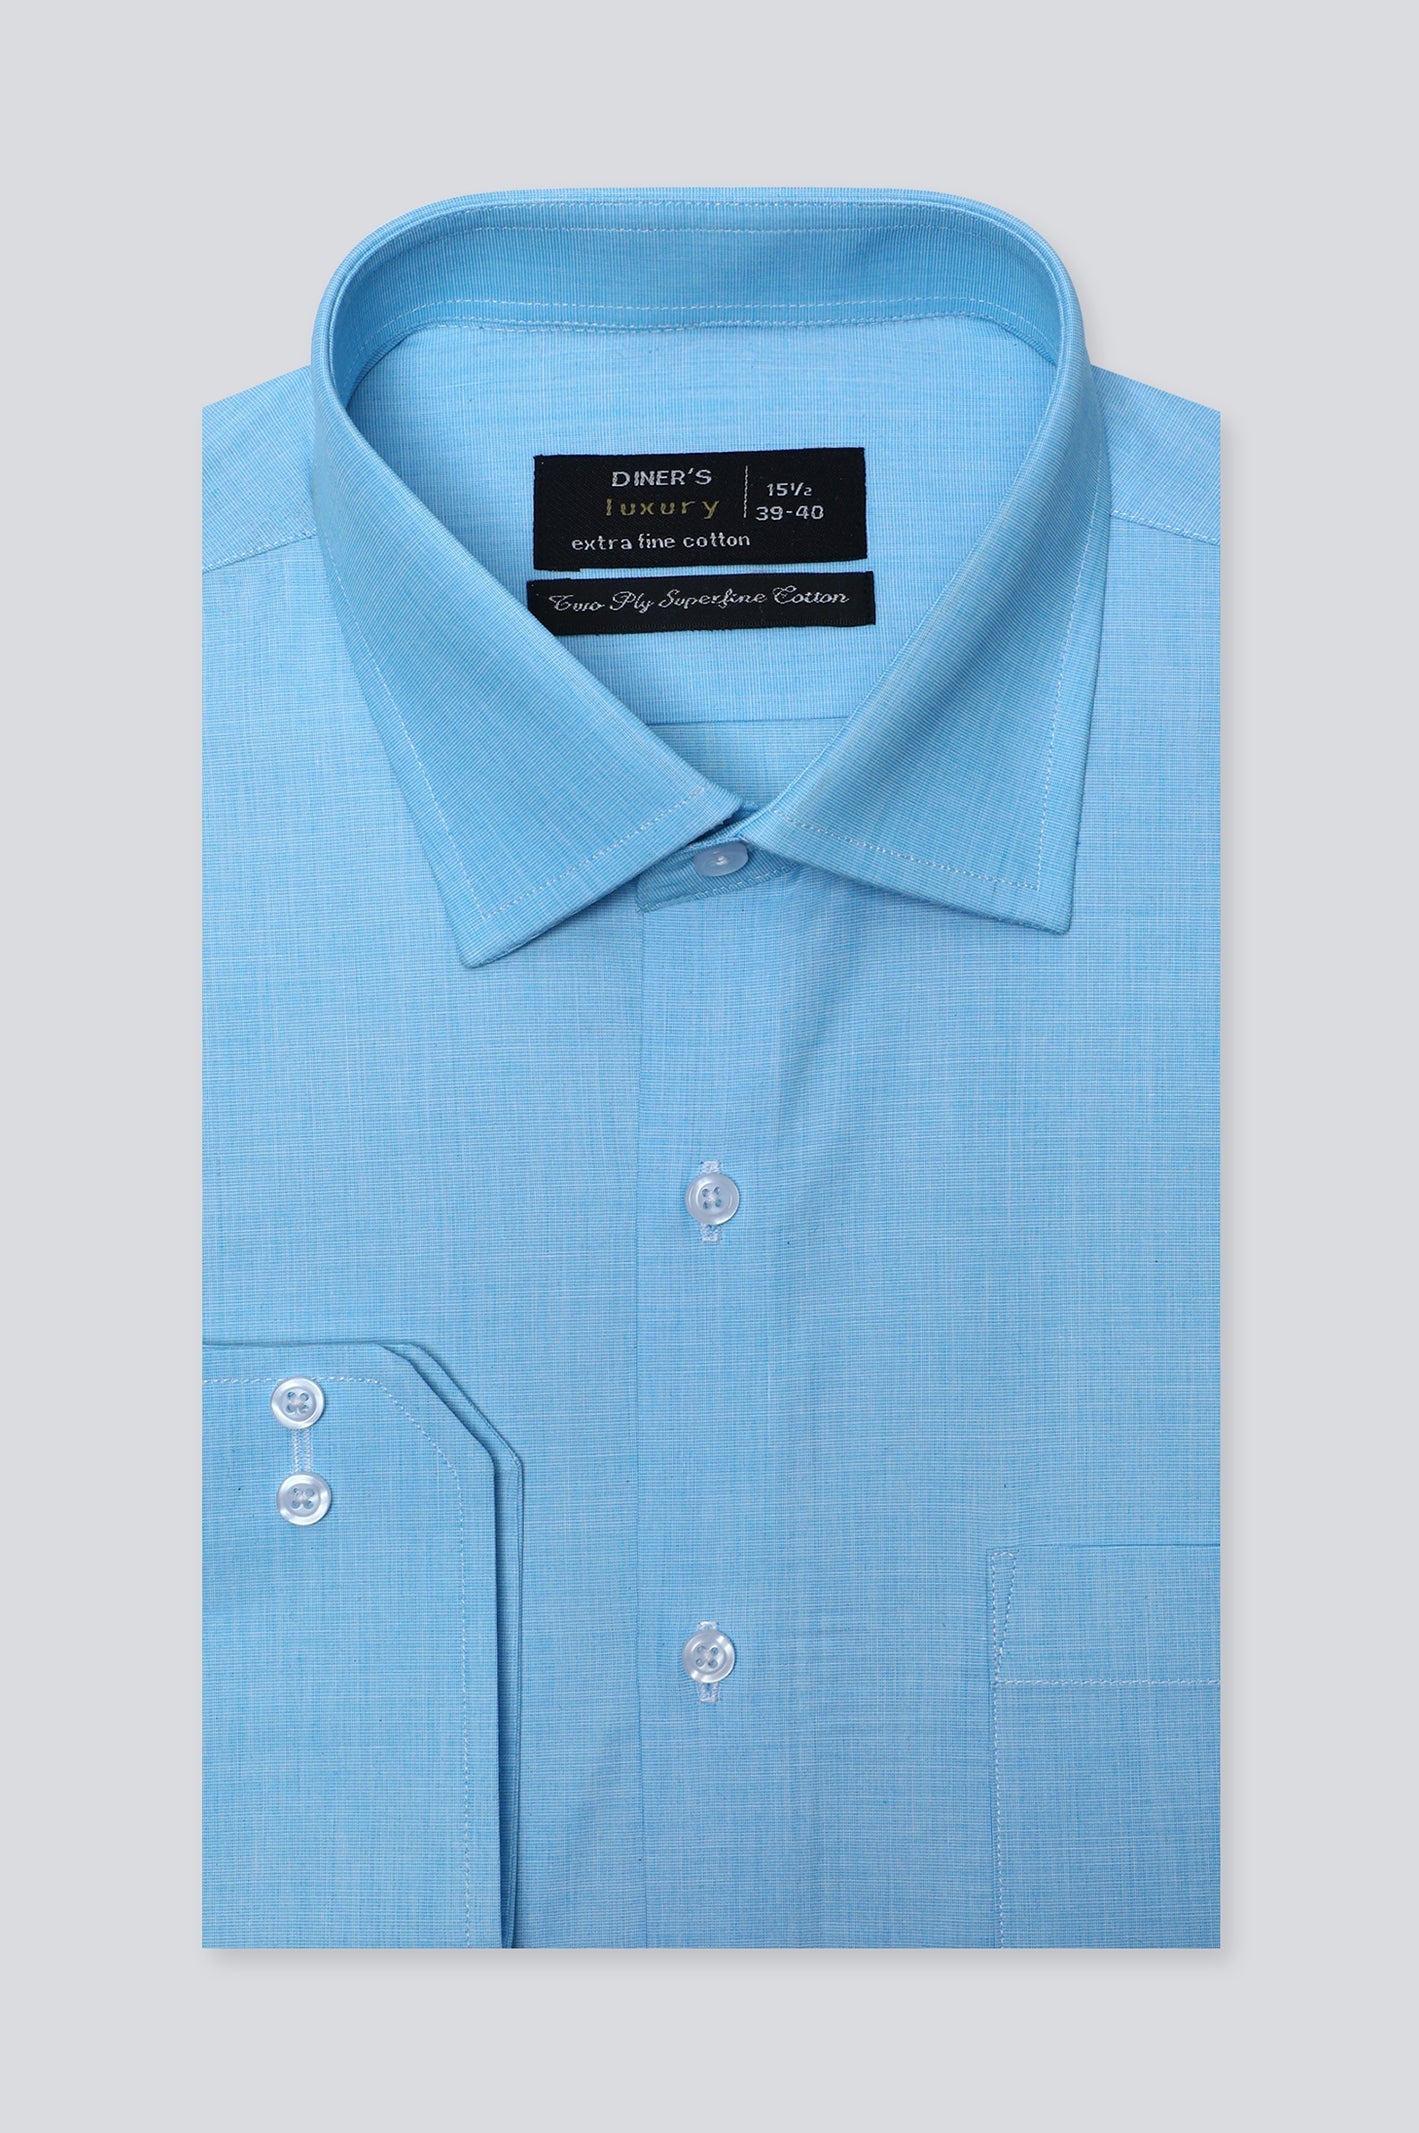 Cyan Texture Formal Shirt For Men - Diners